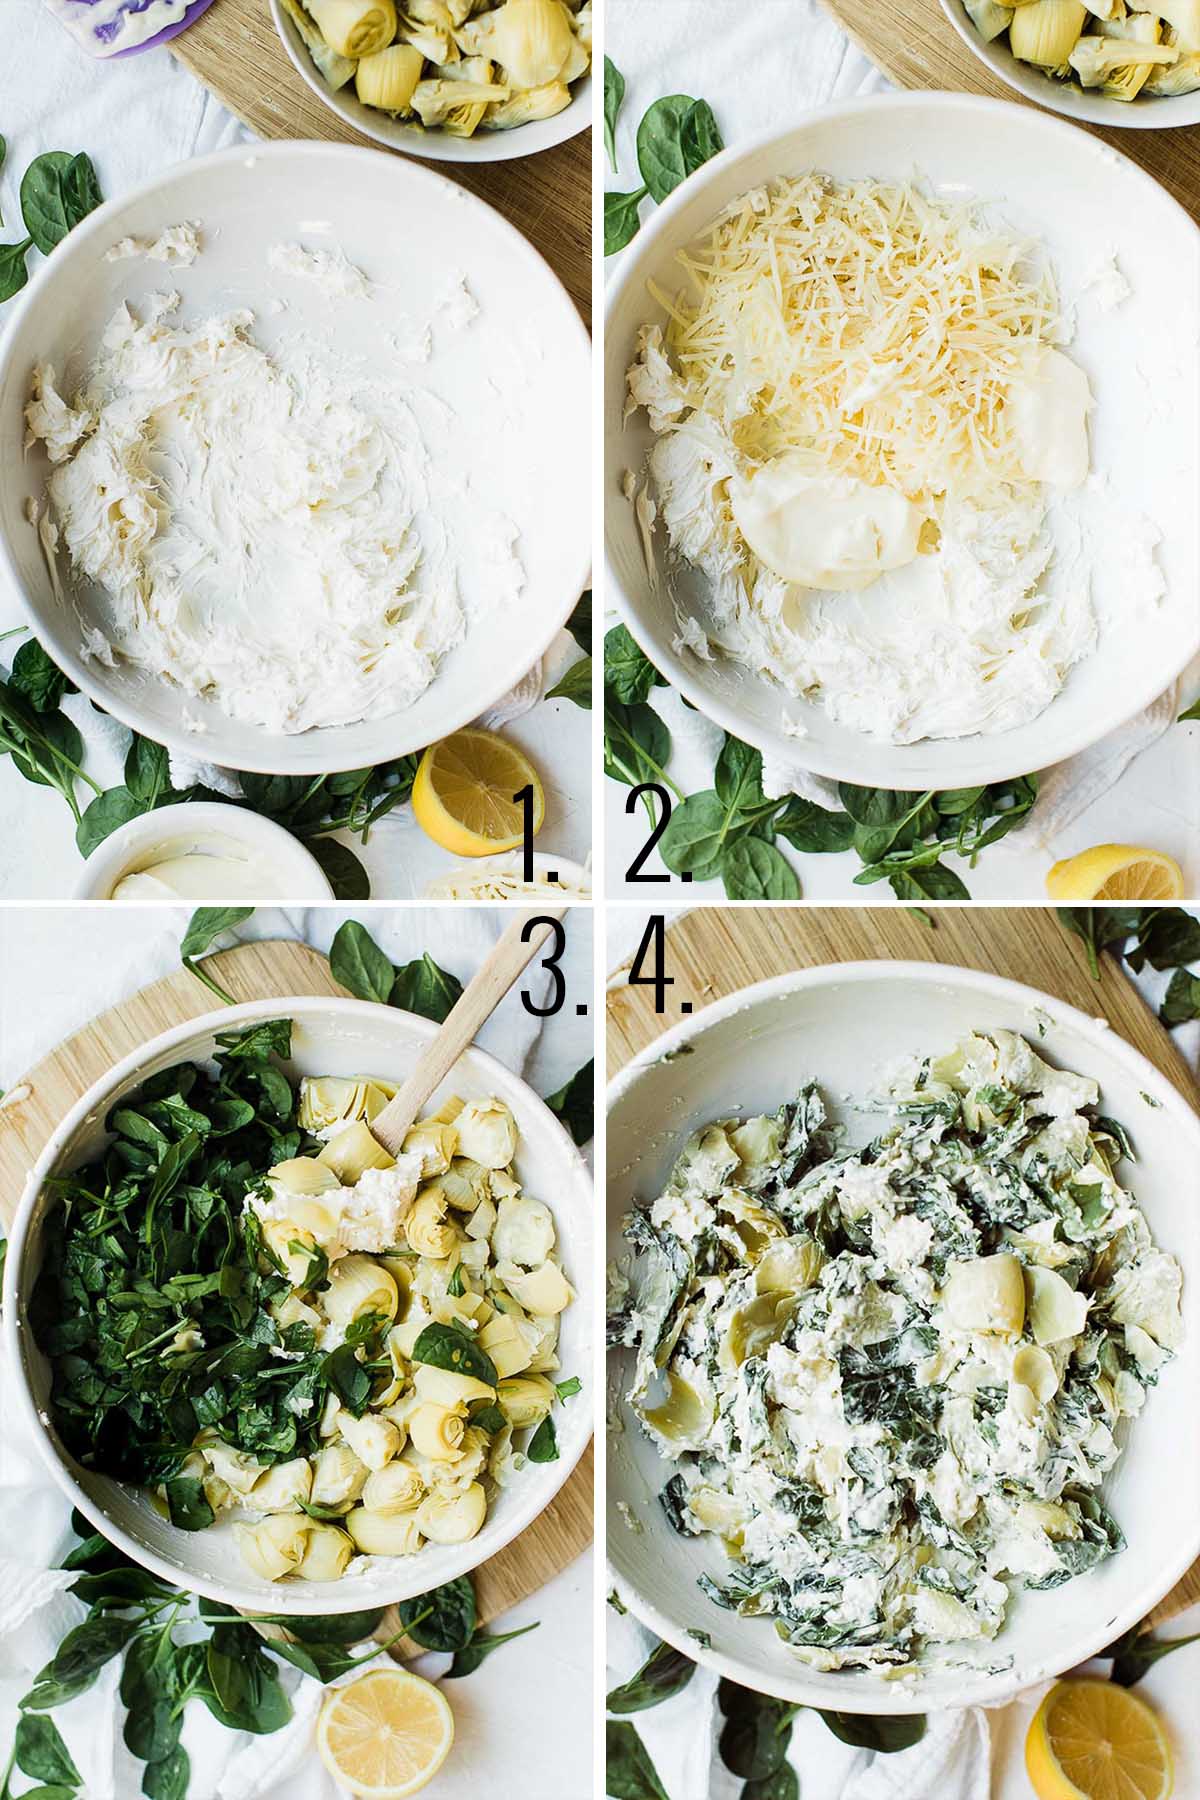 Collage of images making the spinach and artichoke dip.